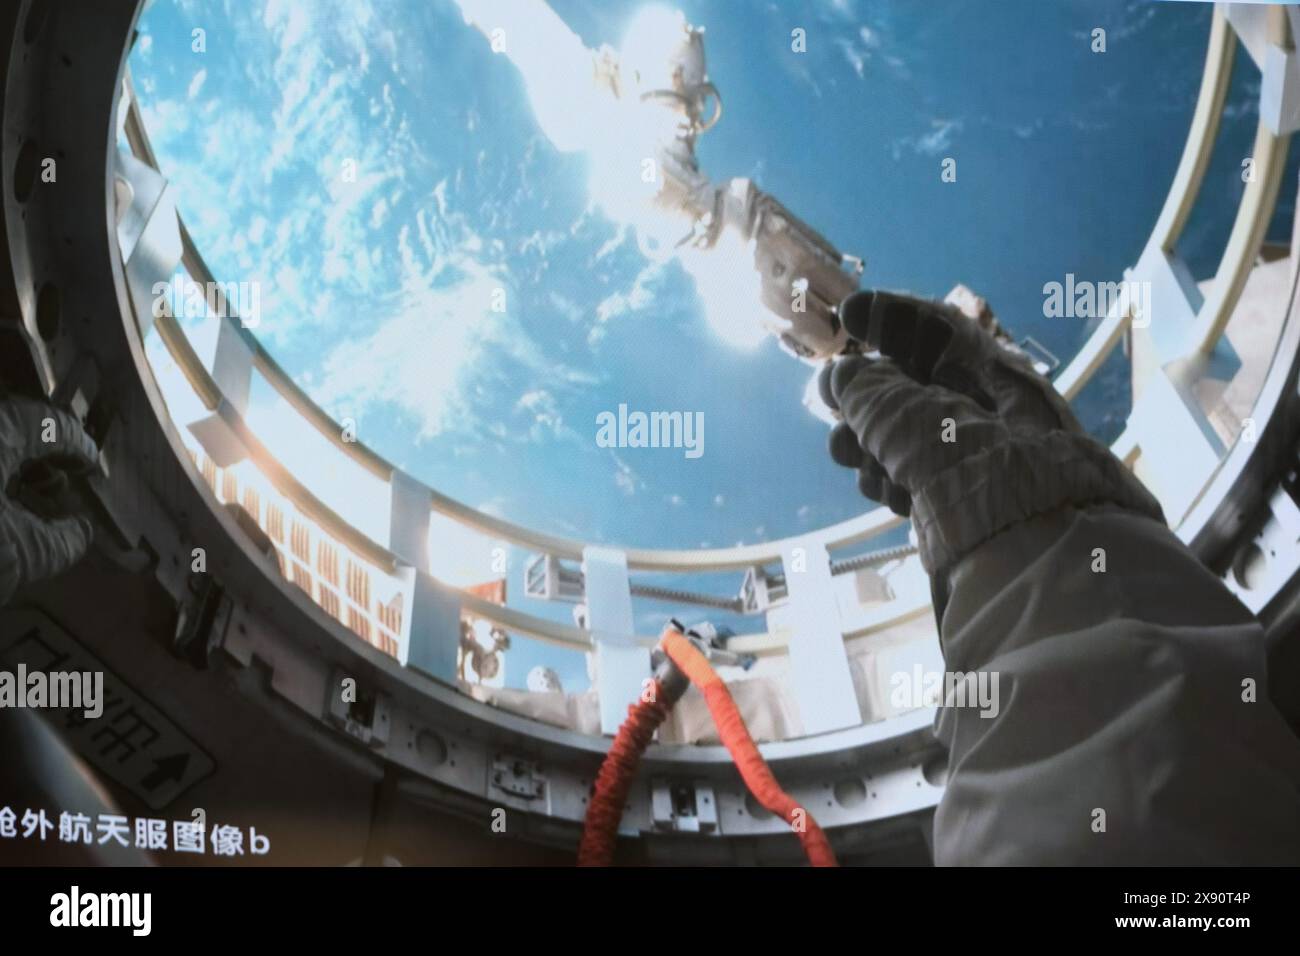 Beijing, China. 28th May, 2024. This screen image captured at Beijing Aerospace Control Center on May 28, 2024 shows Shenzhou-18 astronaut Li Guangsu preparing for extravehicular activities. The Shenzhou-18 crew members on board China's orbiting space station completed their first spacewalk on Tuesday, according to the China Manned Space Agency. Credit: Li Jie/Xinhua/Alamy Live News Stock Photo